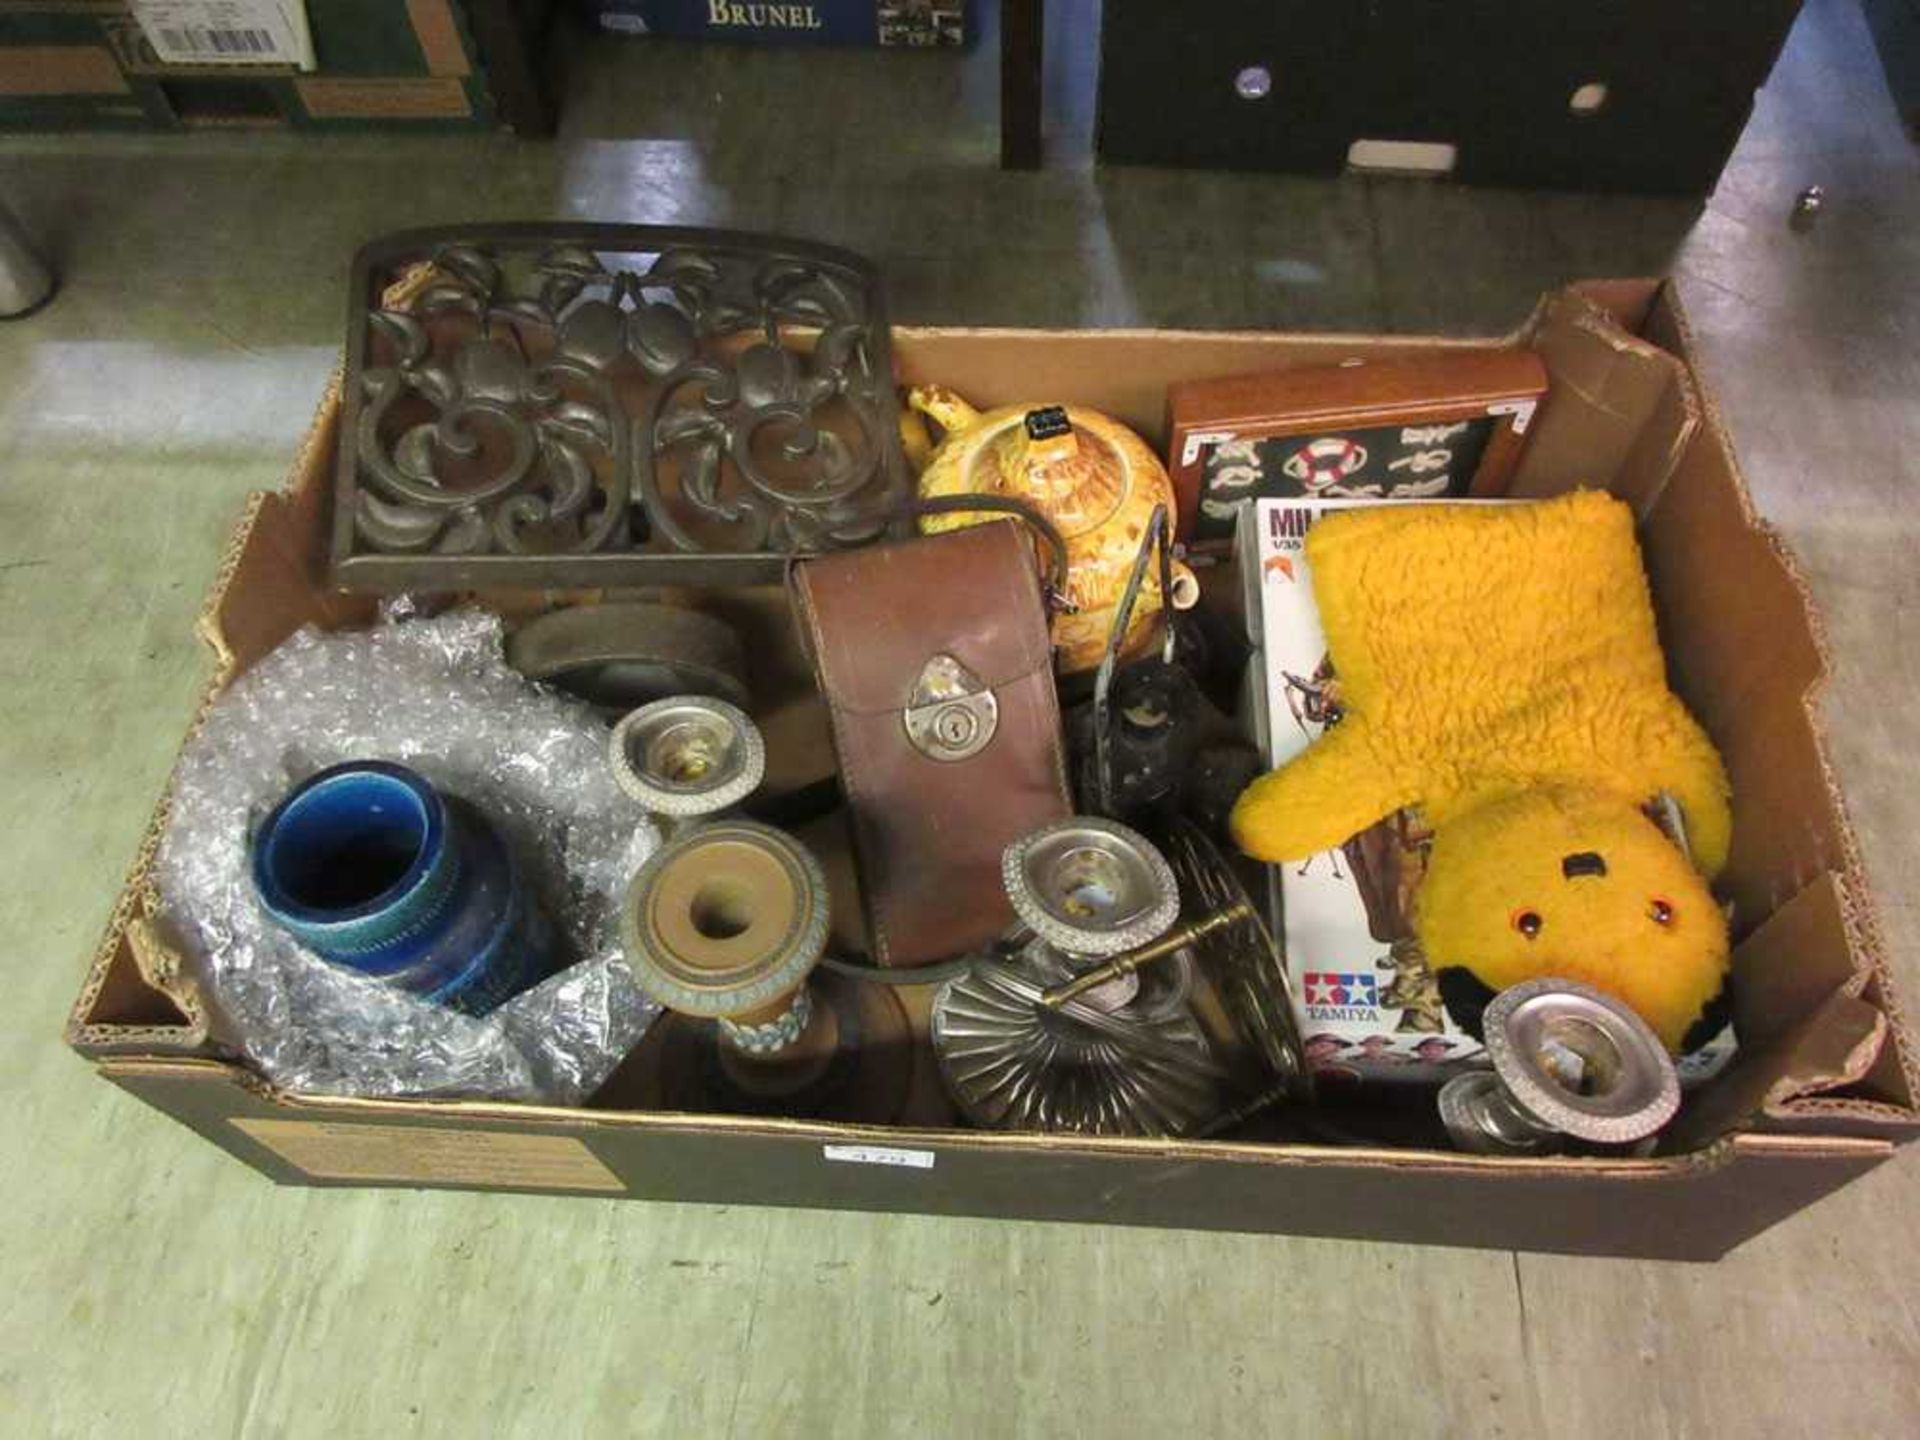 A tray containing metal menu rack, mid-20th century vase, a Sooty glove puppet, etc